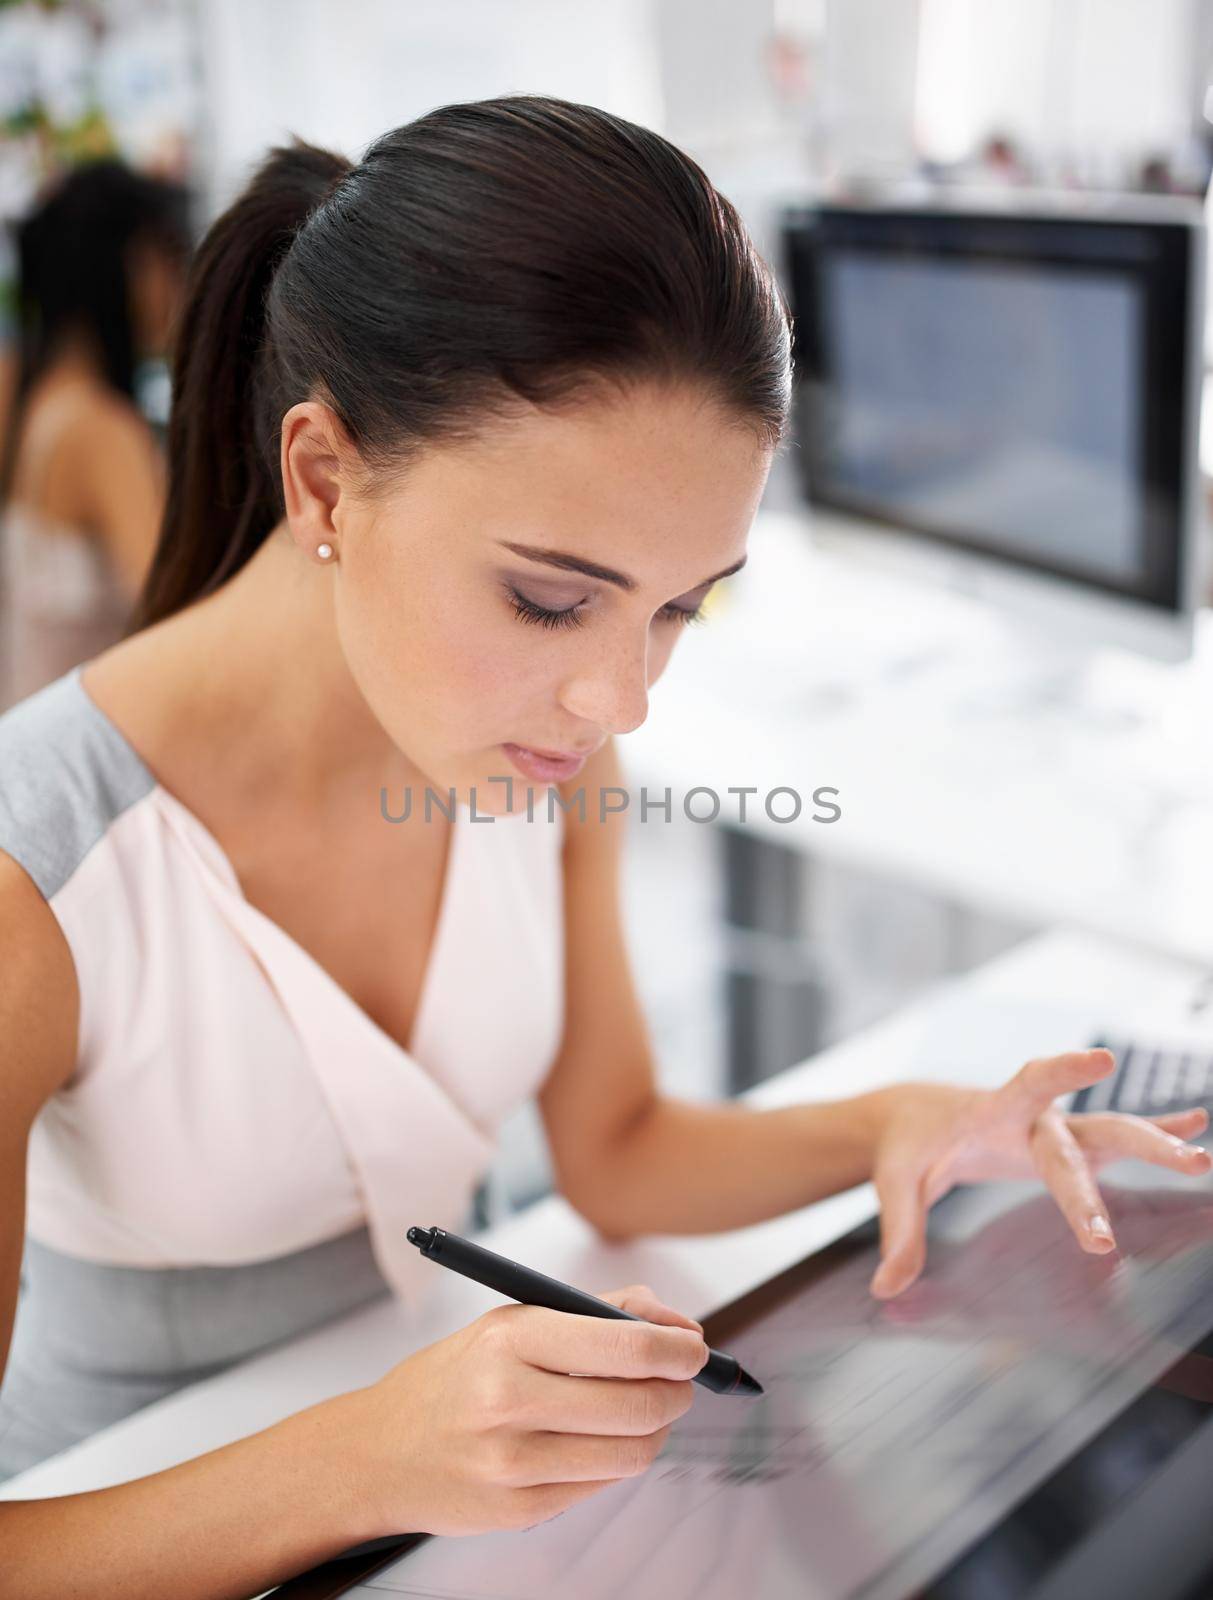 The latest technology is on her side. A young woman working on a digital touchscreen